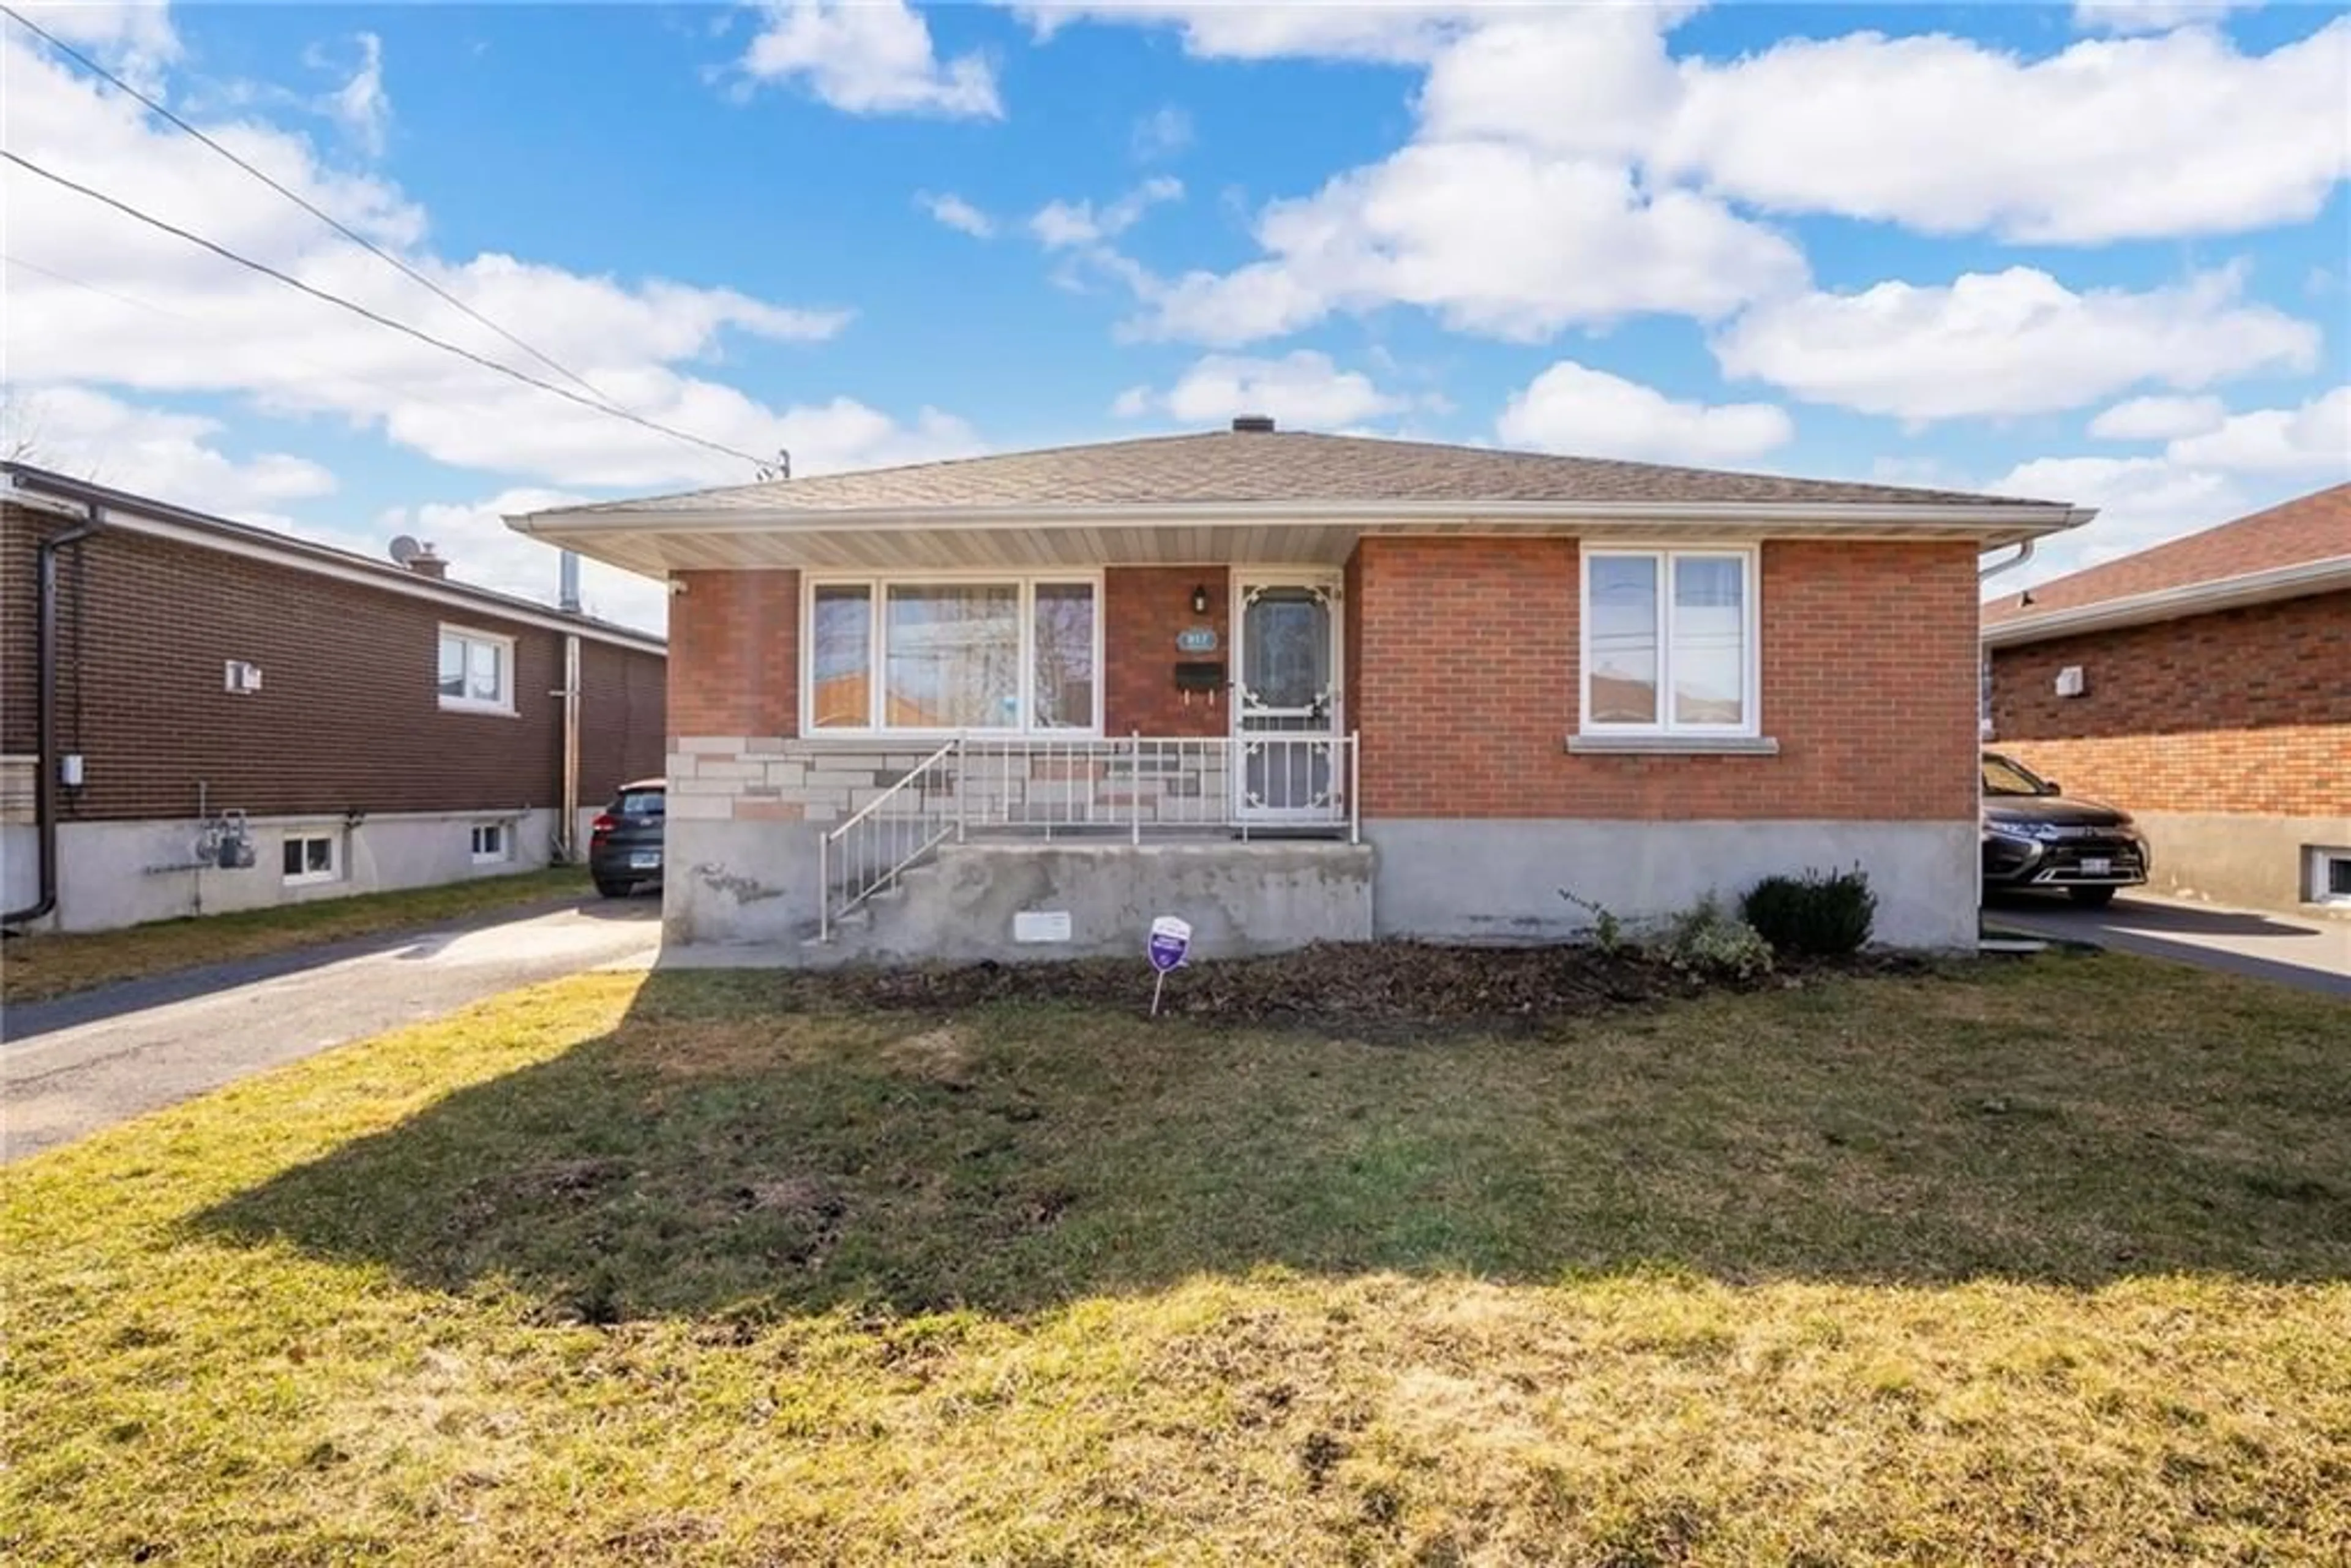 Home with brick exterior material for 217 ANTHONY St, Cornwall Ontario K6H 5K2